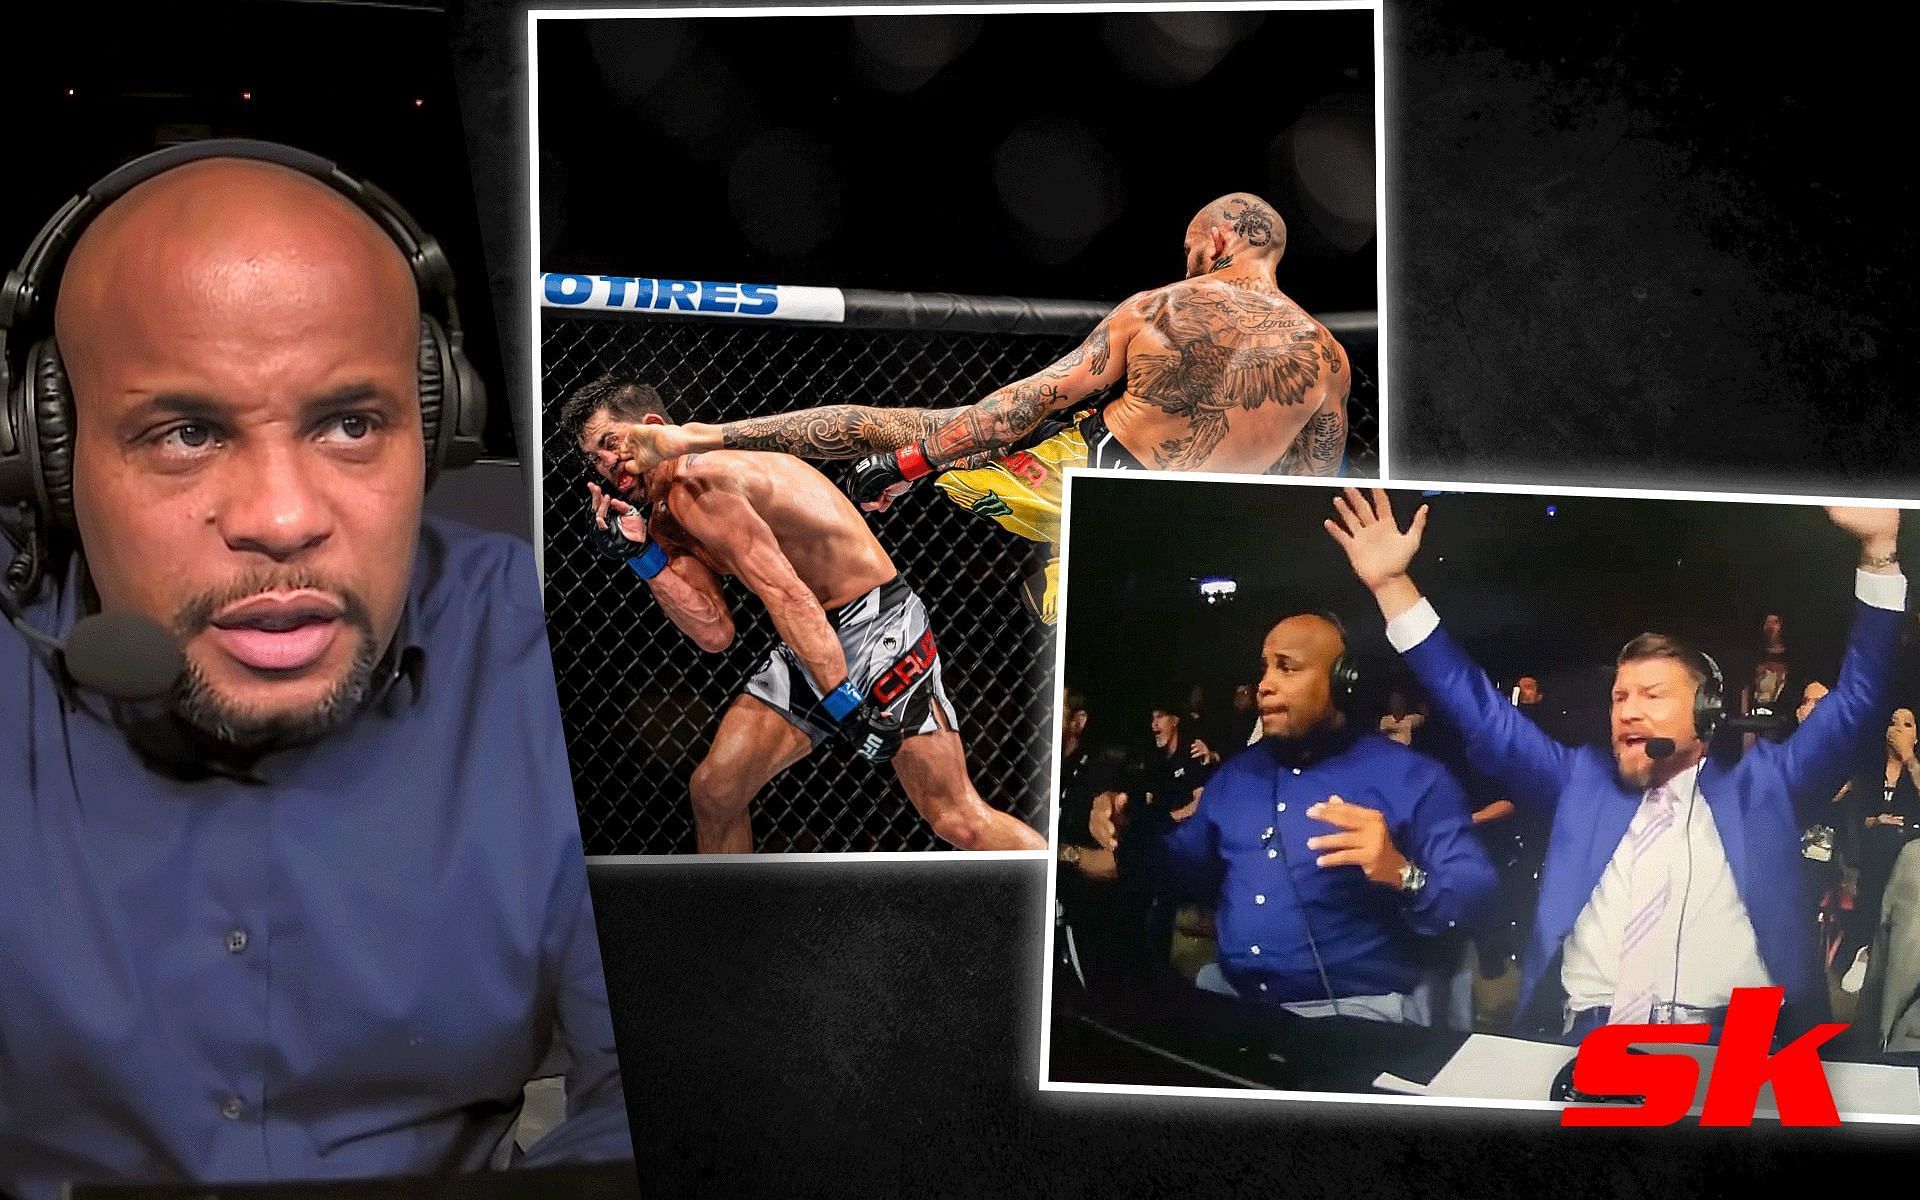 Daniel Cormier was upset to see Dominick Cruz getting knocked out against Marlon Vera [DC image via UFC on YouTube, center image via @ufc on Instagram | right image via @patrickallsyms on Twitter]